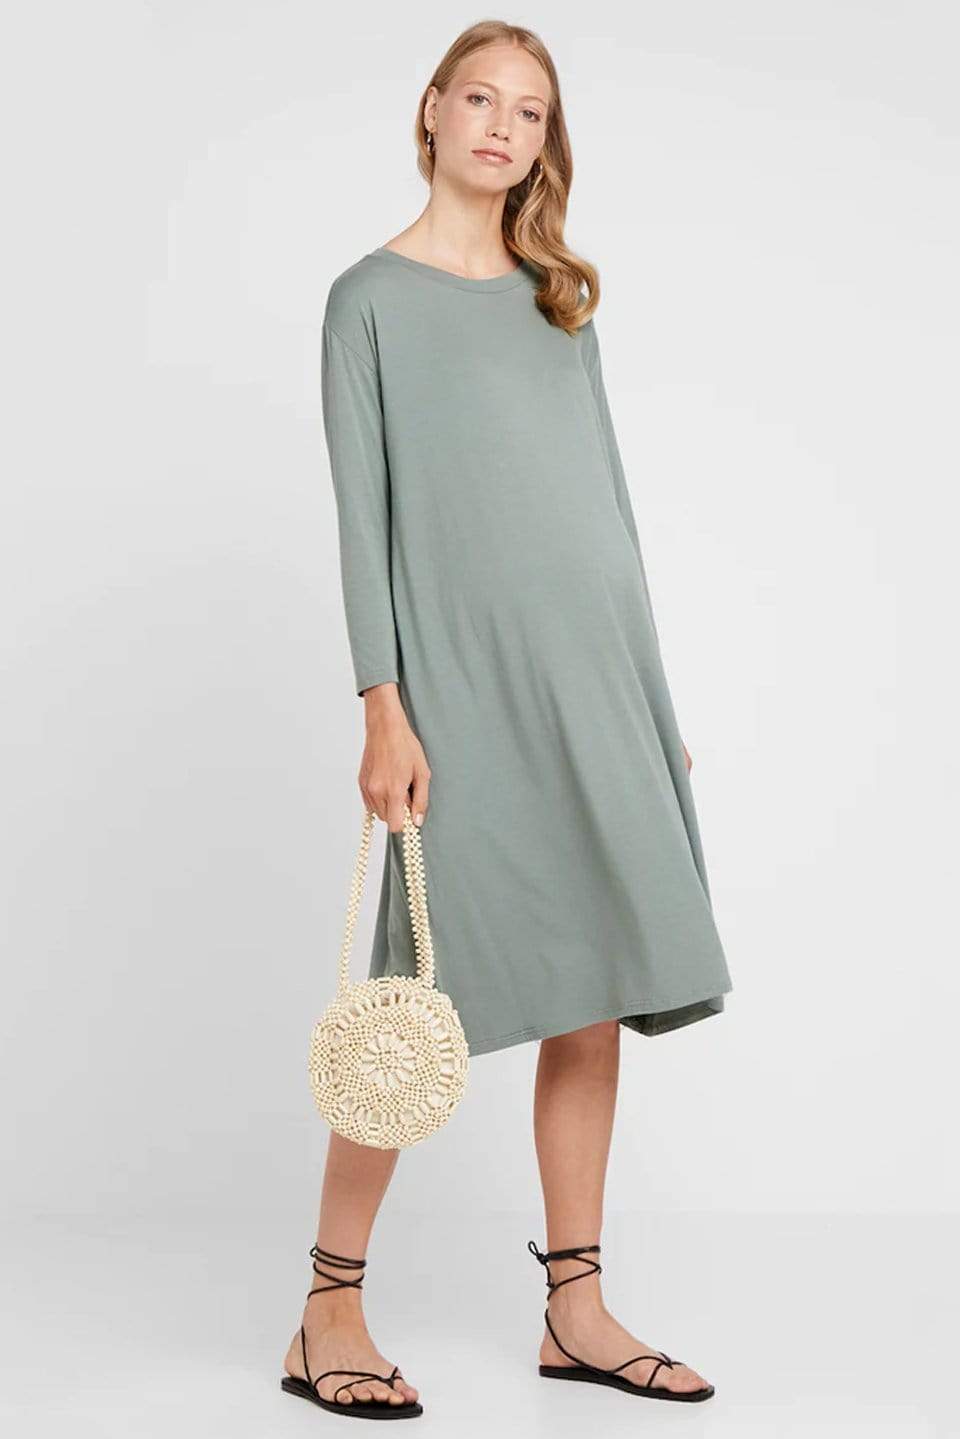 Dany Classic Minimalist Maternity Dress and Nursing Clothes - Spring Maternity Singapore